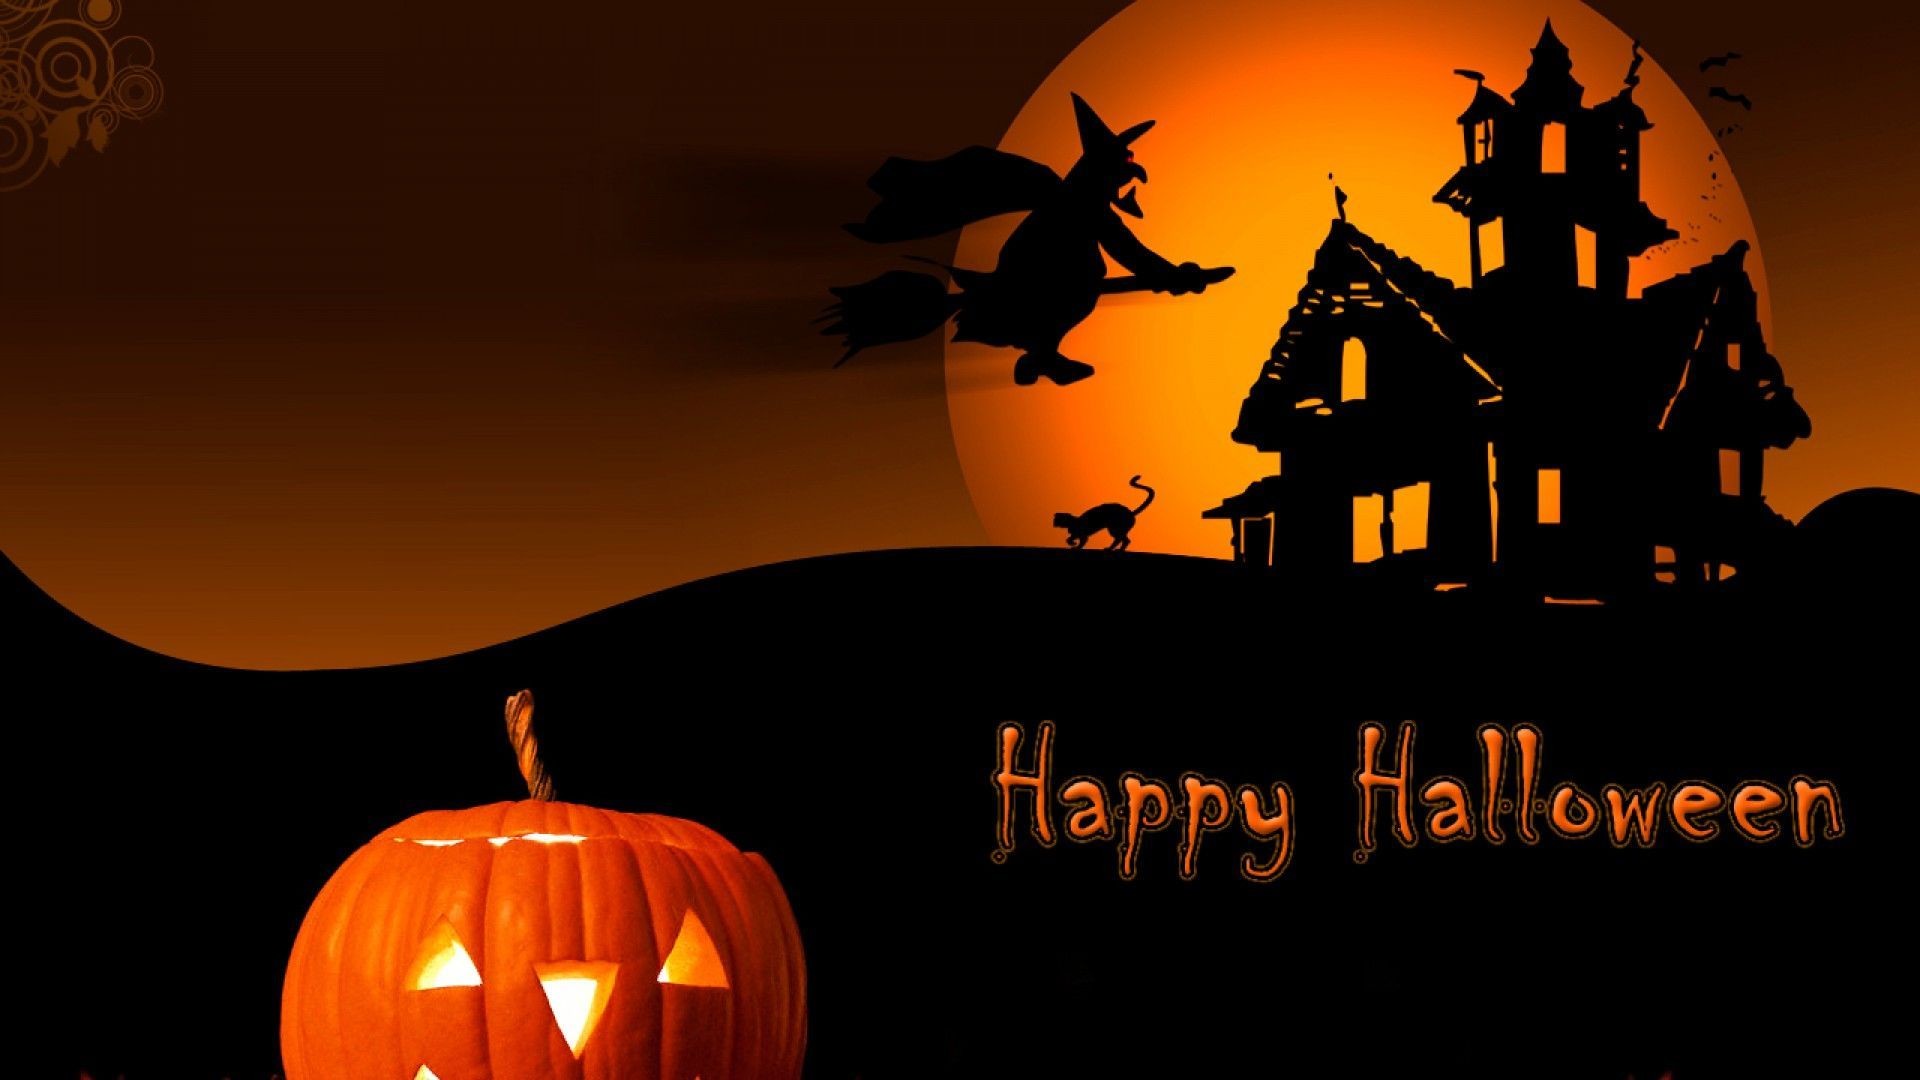 1920x1080 ... Spooky Halloween Backgrounds Collection ...